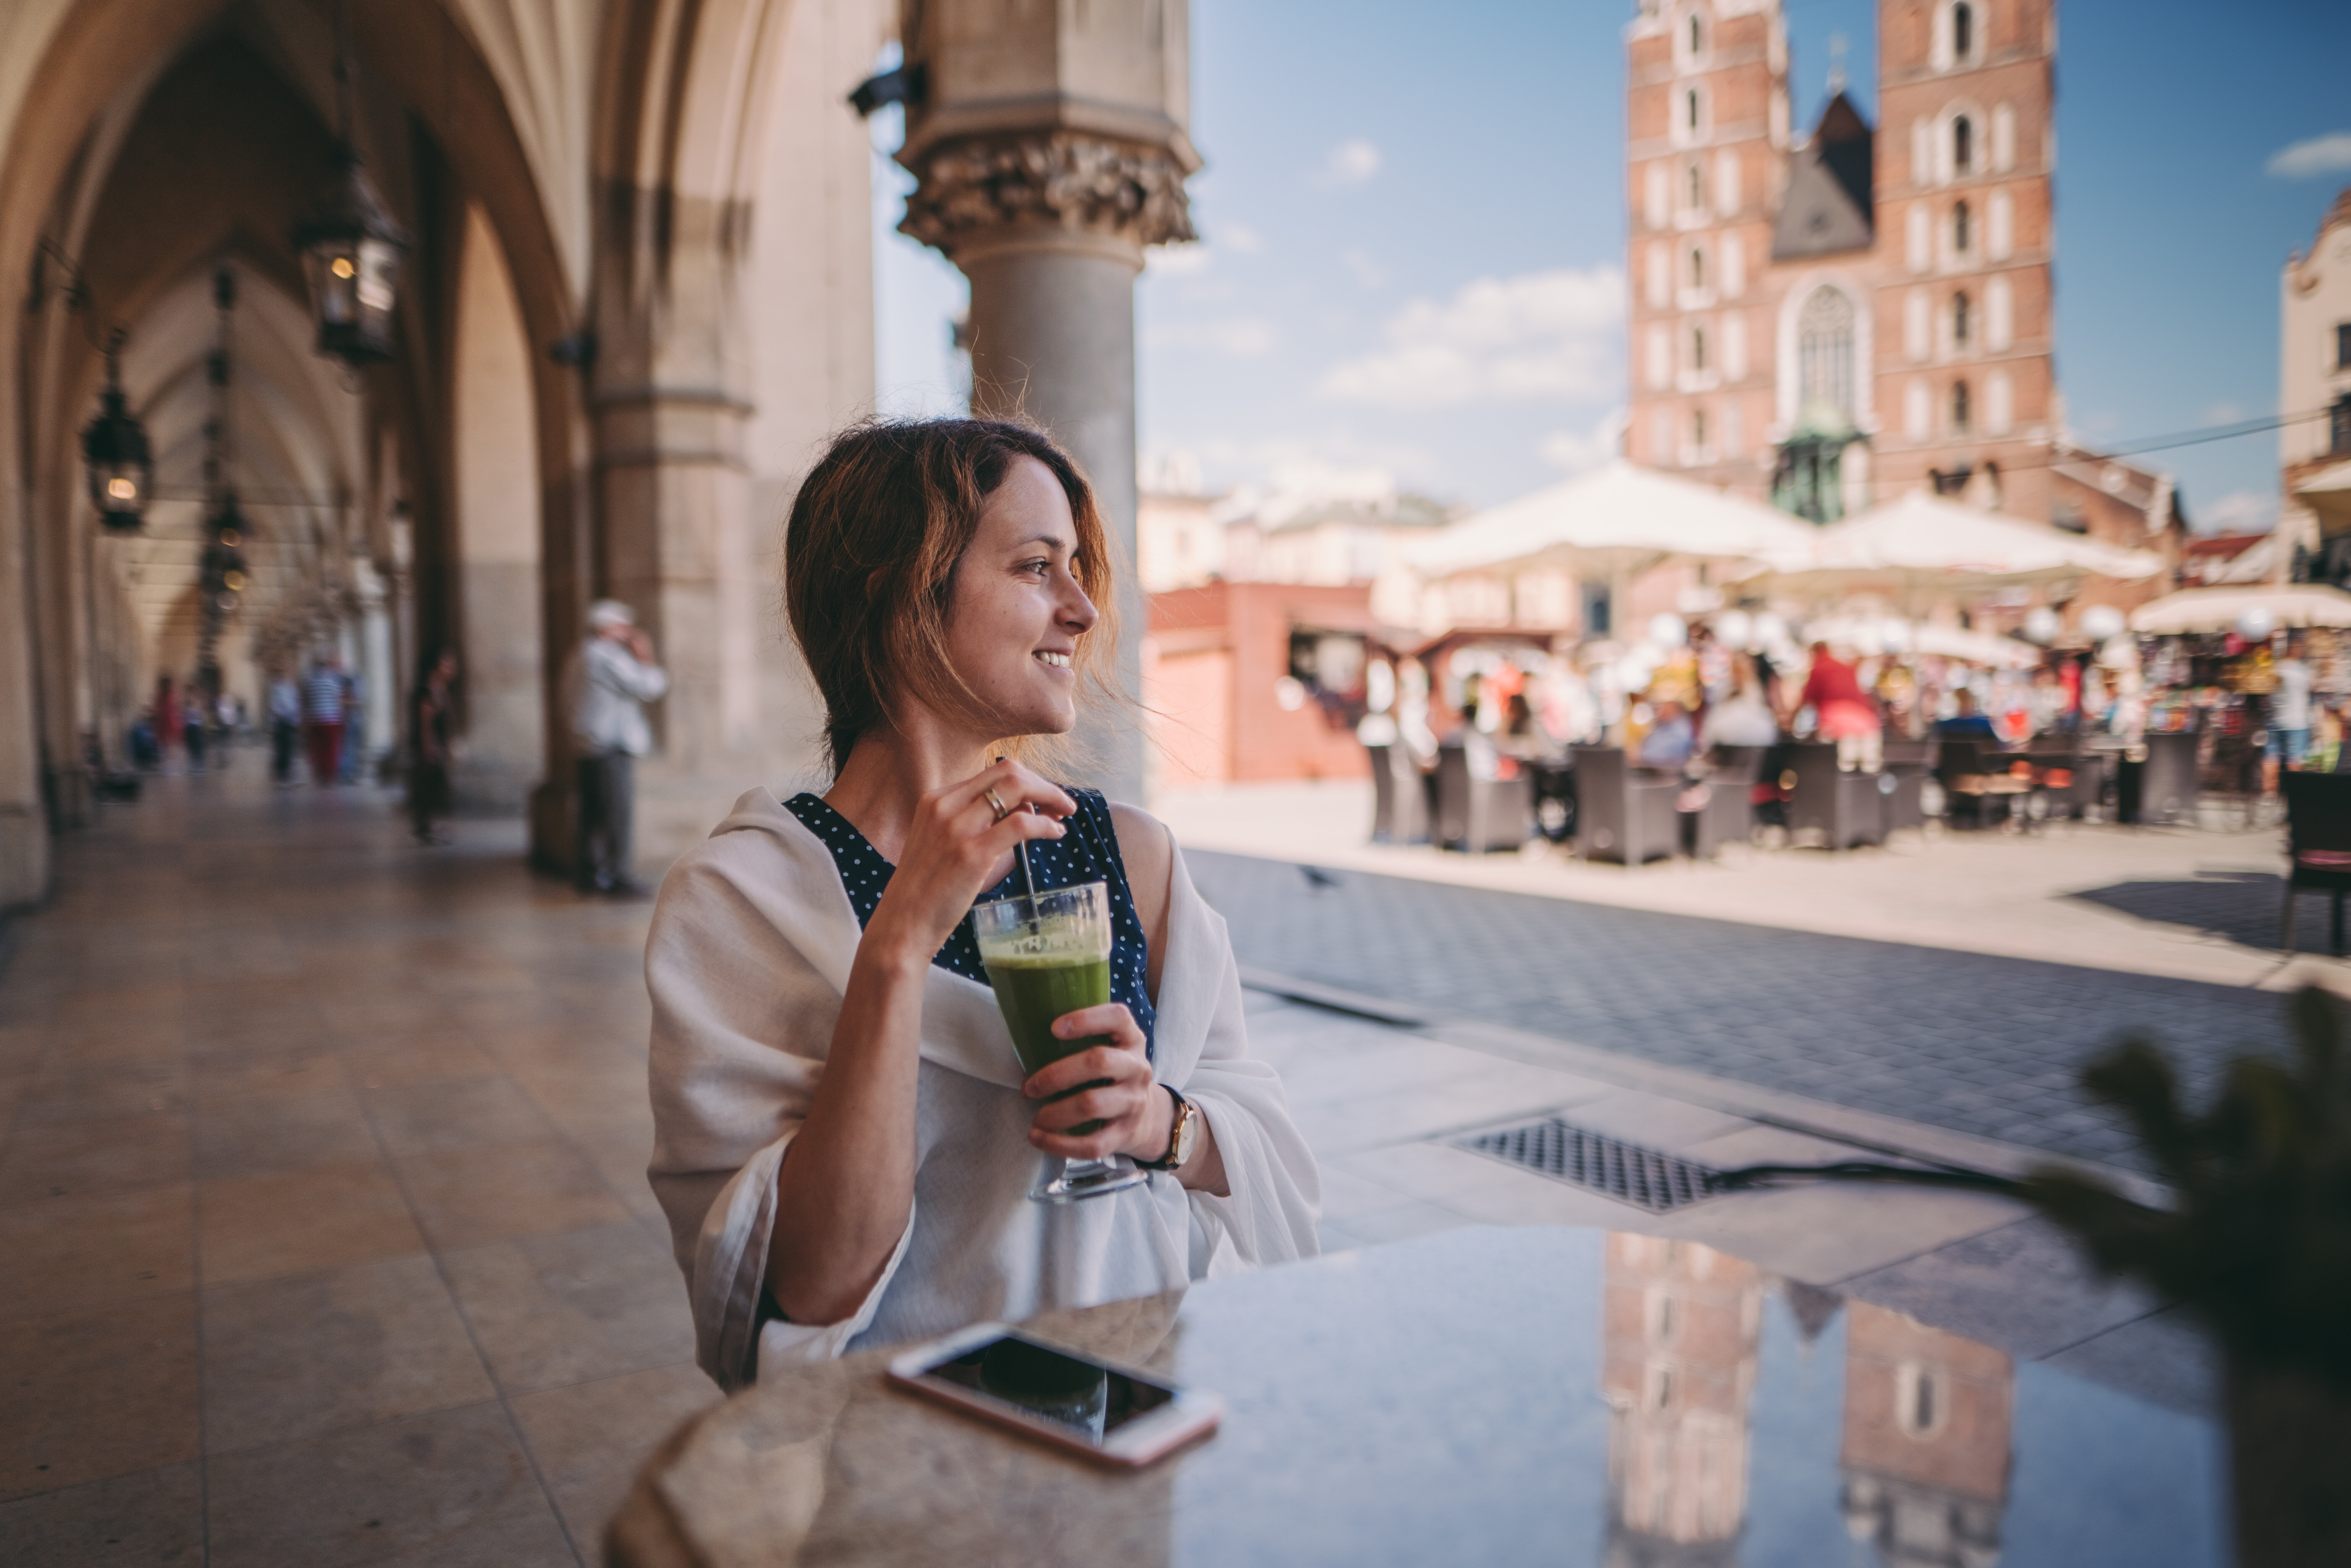 A woman enjoying a drink in the middle of a bustling city